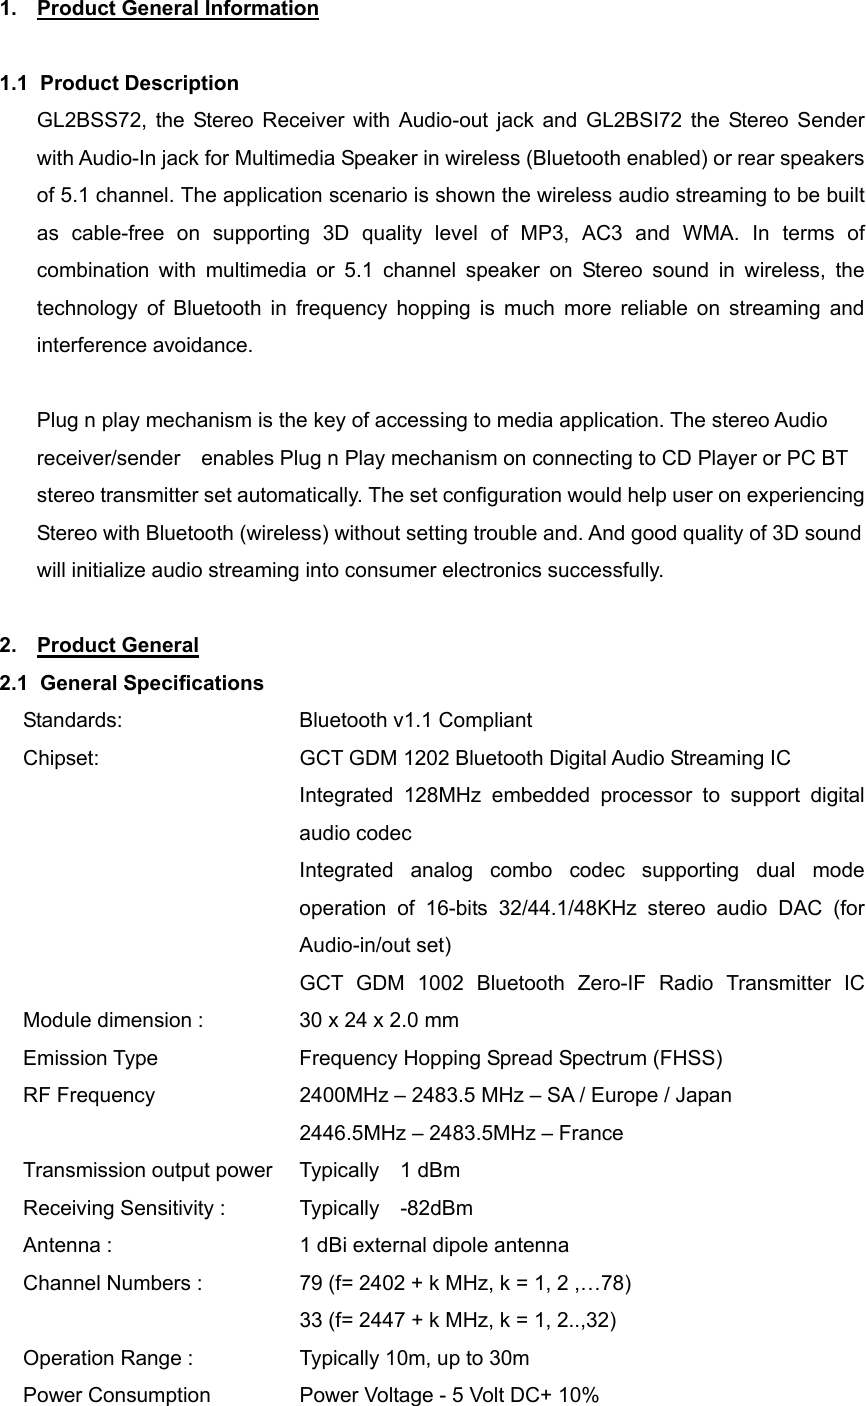 1.  Product General Information  1.1 Product Description GL2BSS72, the Stereo Receiver with Audio-out jack and GL2BSI72 the Stereo Sender with Audio-In jack for Multimedia Speaker in wireless (Bluetooth enabled) or rear speakers of 5.1 channel. The application scenario is shown the wireless audio streaming to be built as cable-free on supporting 3D quality level of MP3, AC3 and WMA. In terms of combination with multimedia or 5.1 channel speaker on Stereo sound in wireless, the technology of Bluetooth in frequency hopping is much more reliable on streaming and interference avoidance.    Plug n play mechanism is the key of accessing to media application. The stereo Audio receiver/sender    enables Plug n Play mechanism on connecting to CD Player or PC BT stereo transmitter set automatically. The set configuration would help user on experiencing Stereo with Bluetooth (wireless) without setting trouble and. And good quality of 3D sound will initialize audio streaming into consumer electronics successfully.  2. Product General 2.1 General Specifications Standards:    Bluetooth v1.1 Compliant Chipset:                GCT GDM 1202 Bluetooth Digital Audio Streaming IC Integrated 128MHz embedded processor to support digital audio codec Integrated analog combo codec supporting dual mode operation of 16-bits 32/44.1/48KHz stereo audio DAC (for Audio-in/out set)                          GCT GDM 1002  Bluetooth Zero-IF  Radio Transmitter  IC            Module dimension :            30 x 24 x 2.0 mm   Emission Type      Frequency Hopping Spread Spectrum (FHSS) RF Frequency      2400MHz – 2483.5 MHz – SA / Europe / Japan                            2446.5MHz – 2483.5MHz – France Transmission output power   Typically  1 dBm Receiving Sensitivity :        Typically  -82dBm Antenna :                  1 dBi external dipole antenna Channel Numbers :                79 (f= 2402 + k MHz, k = 1, 2 ,…78)               33 (f= 2447 + k MHz, k = 1, 2..,32) Operation Range :                Typically 10m, up to 30m Power Consumption                Power Voltage - 5 Volt DC+ 10% 